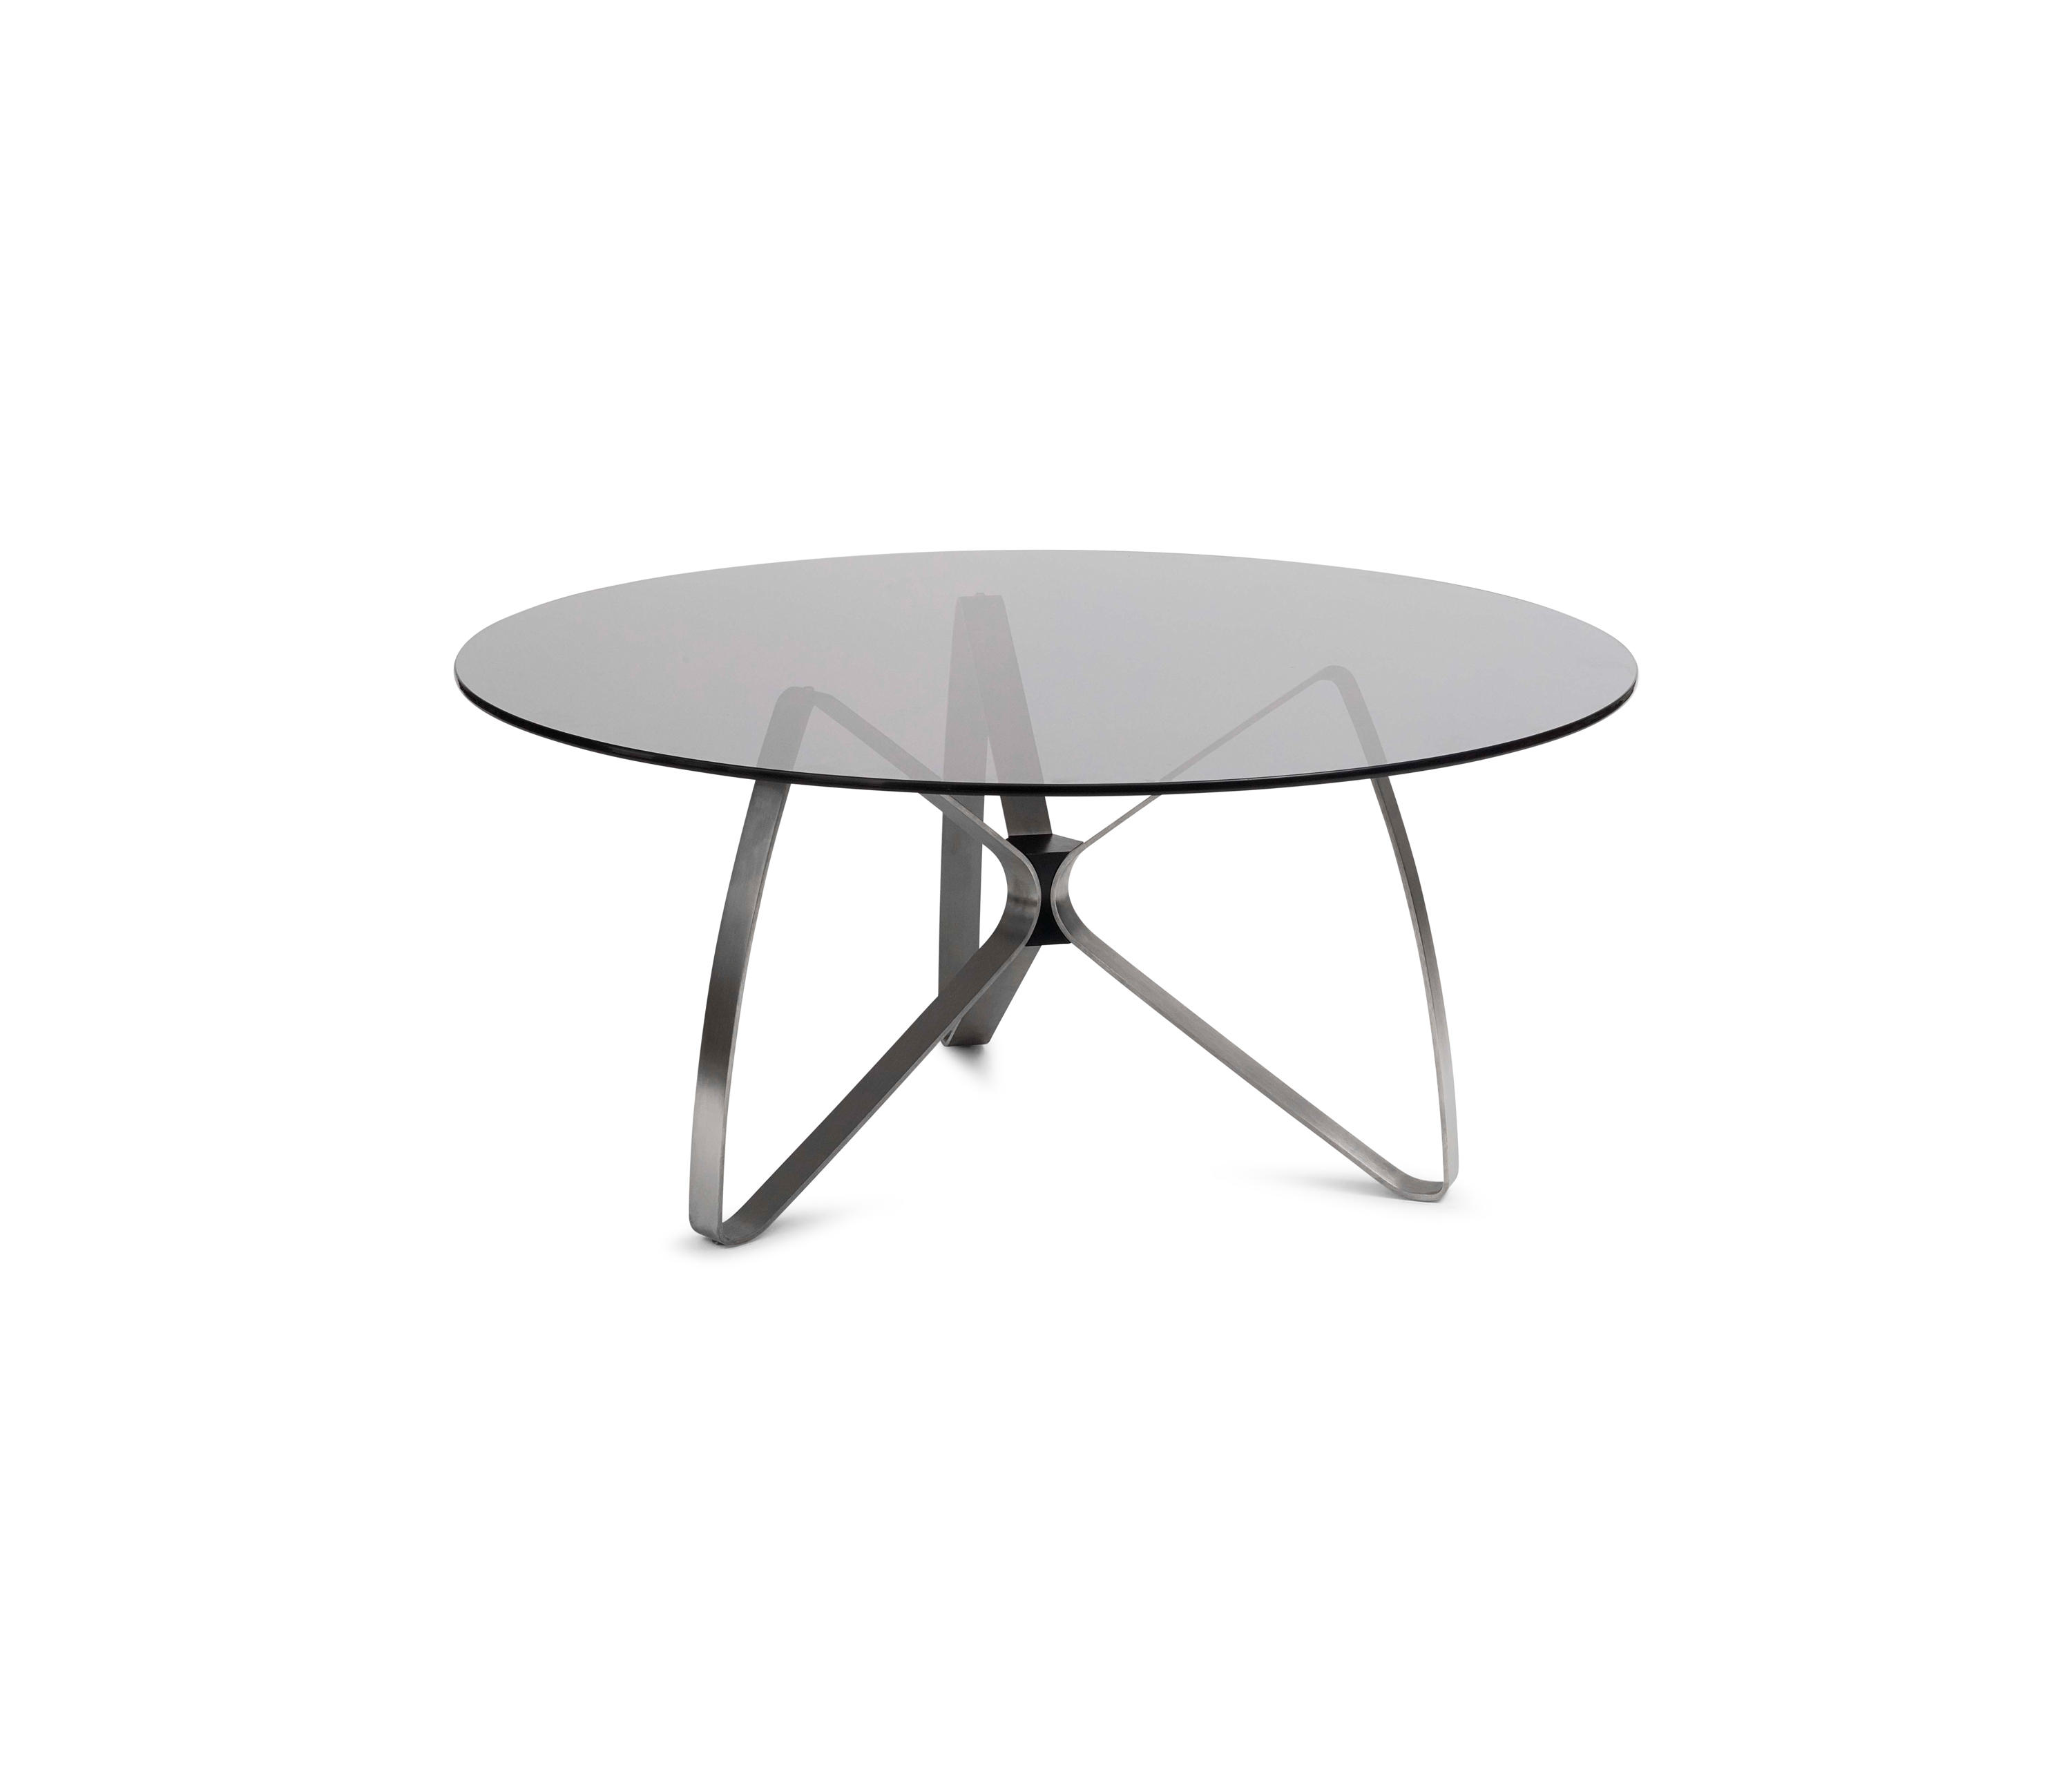 Bowtie | table one & designer furniture | Architonic